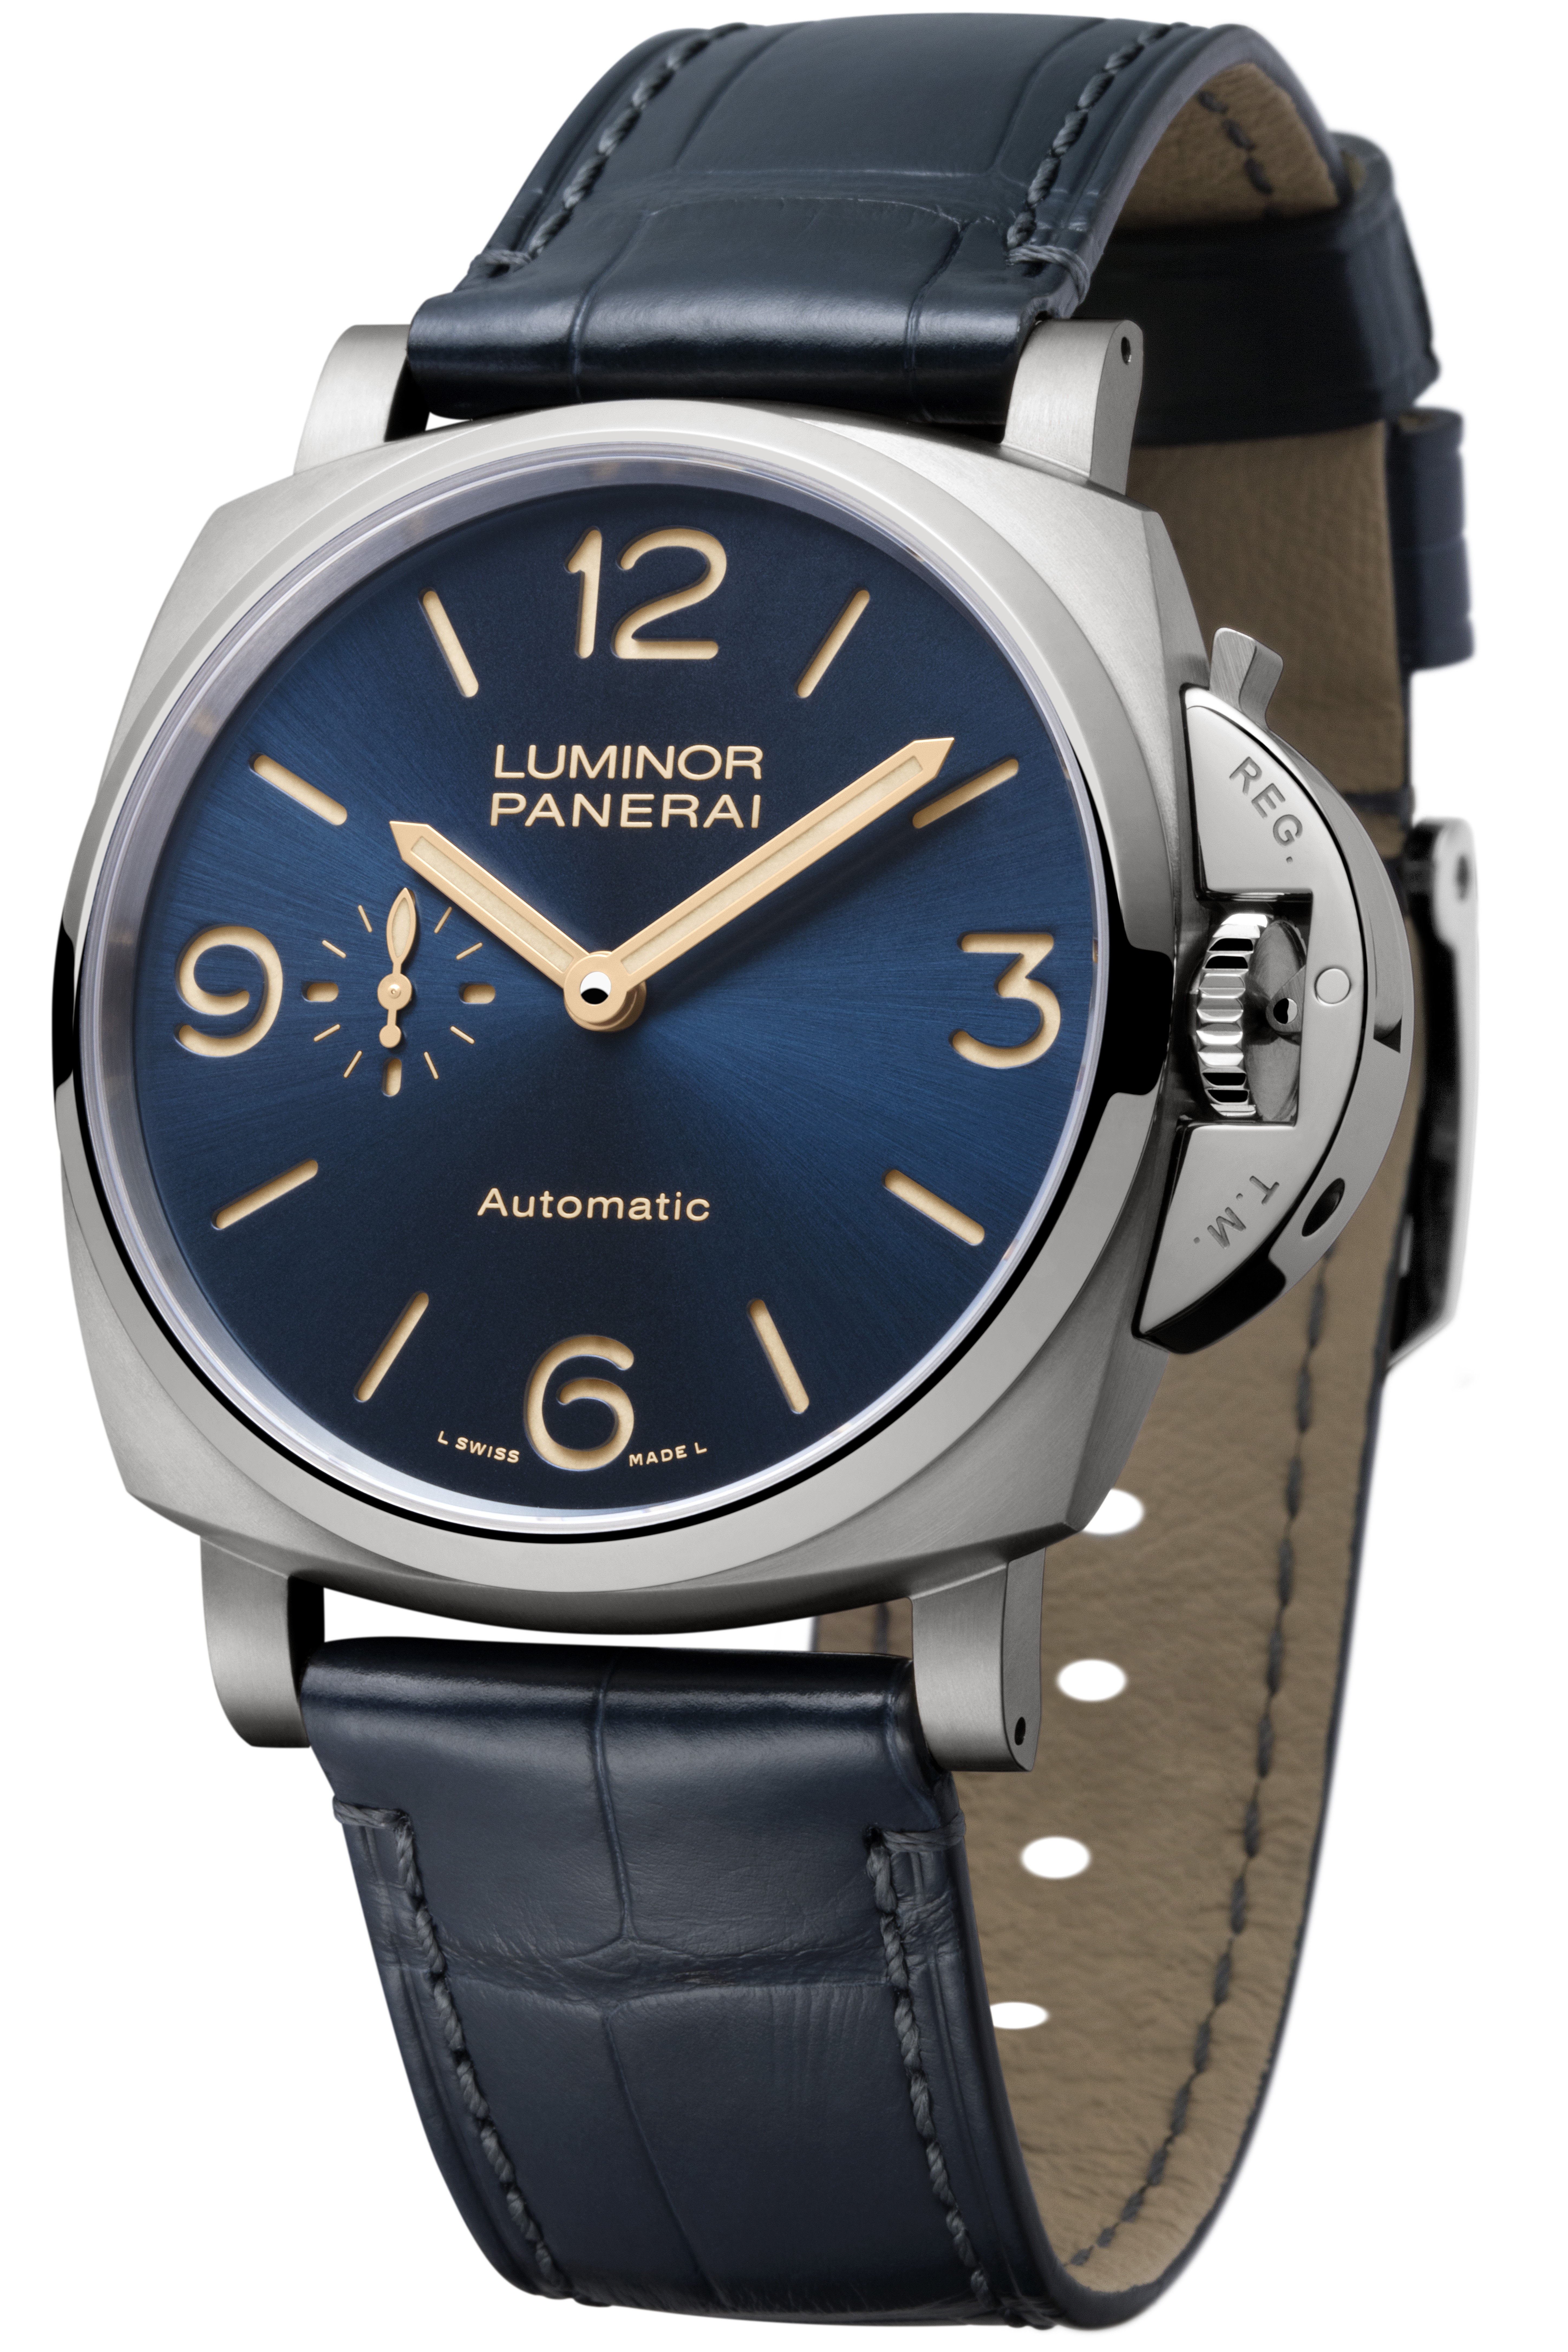 An FP Journe in beautiful brown; a Panerai in midnight blue; and a black-on-black Girard-Perregaux - which one is you?